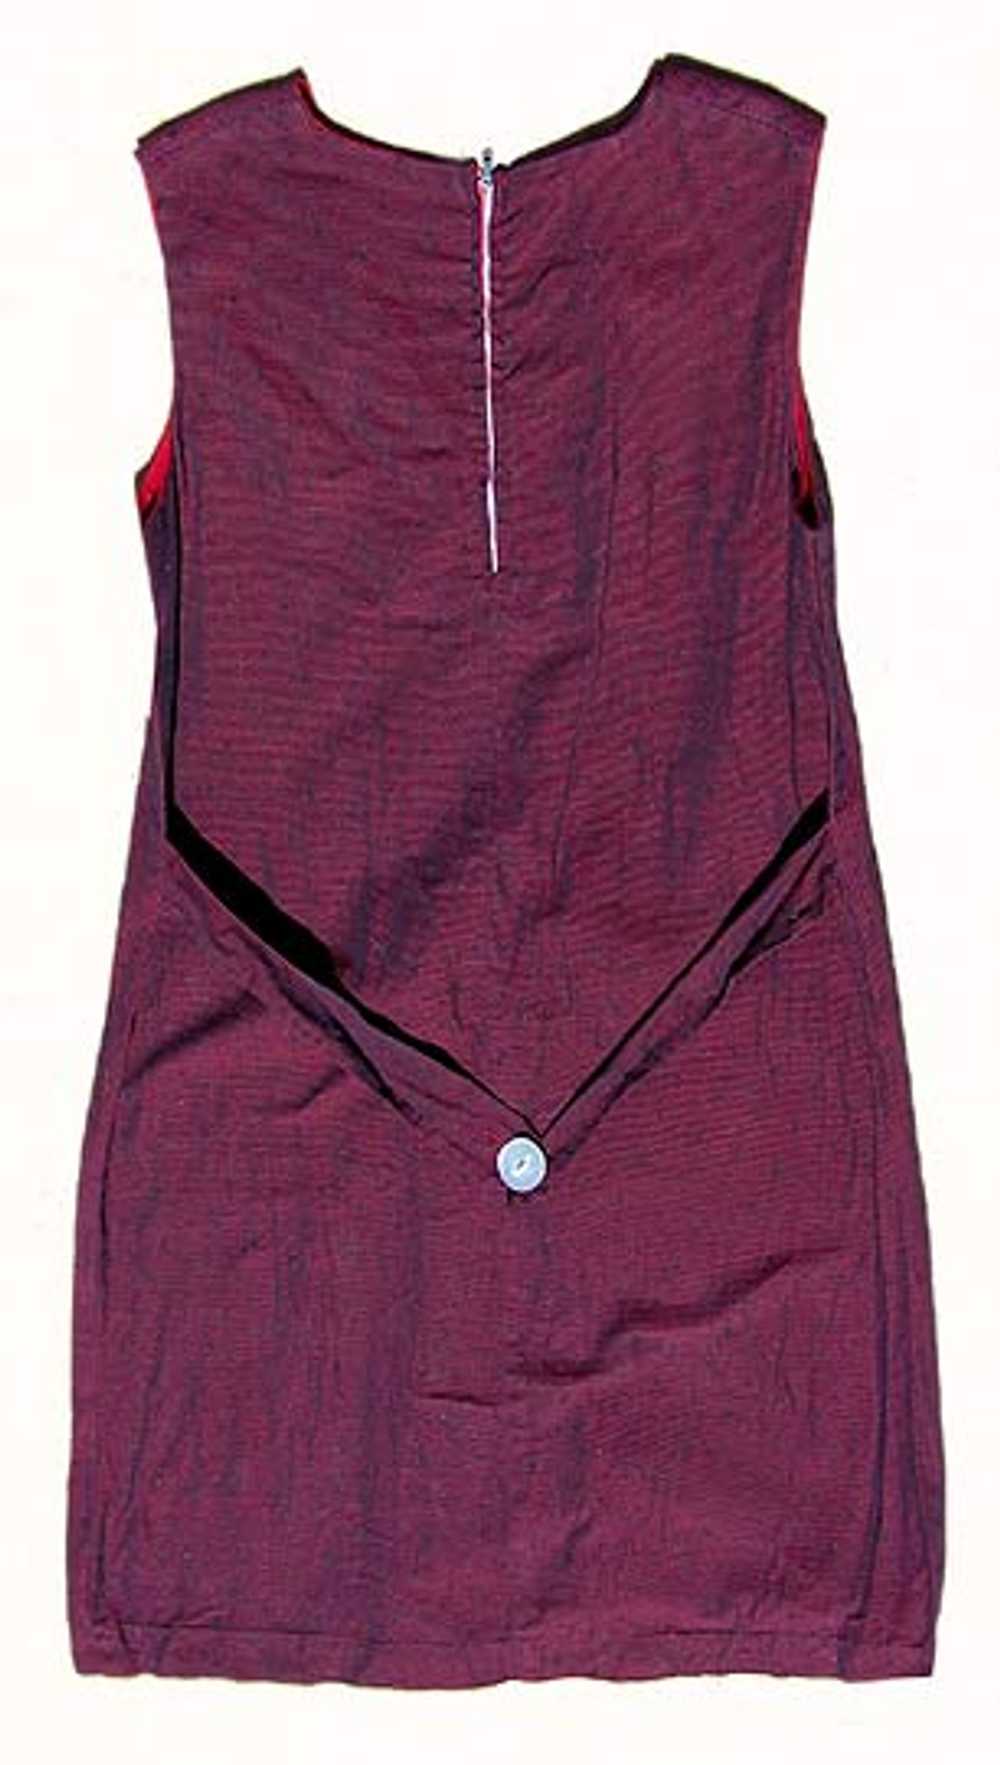 Oxblood dotted playsuit - image 4